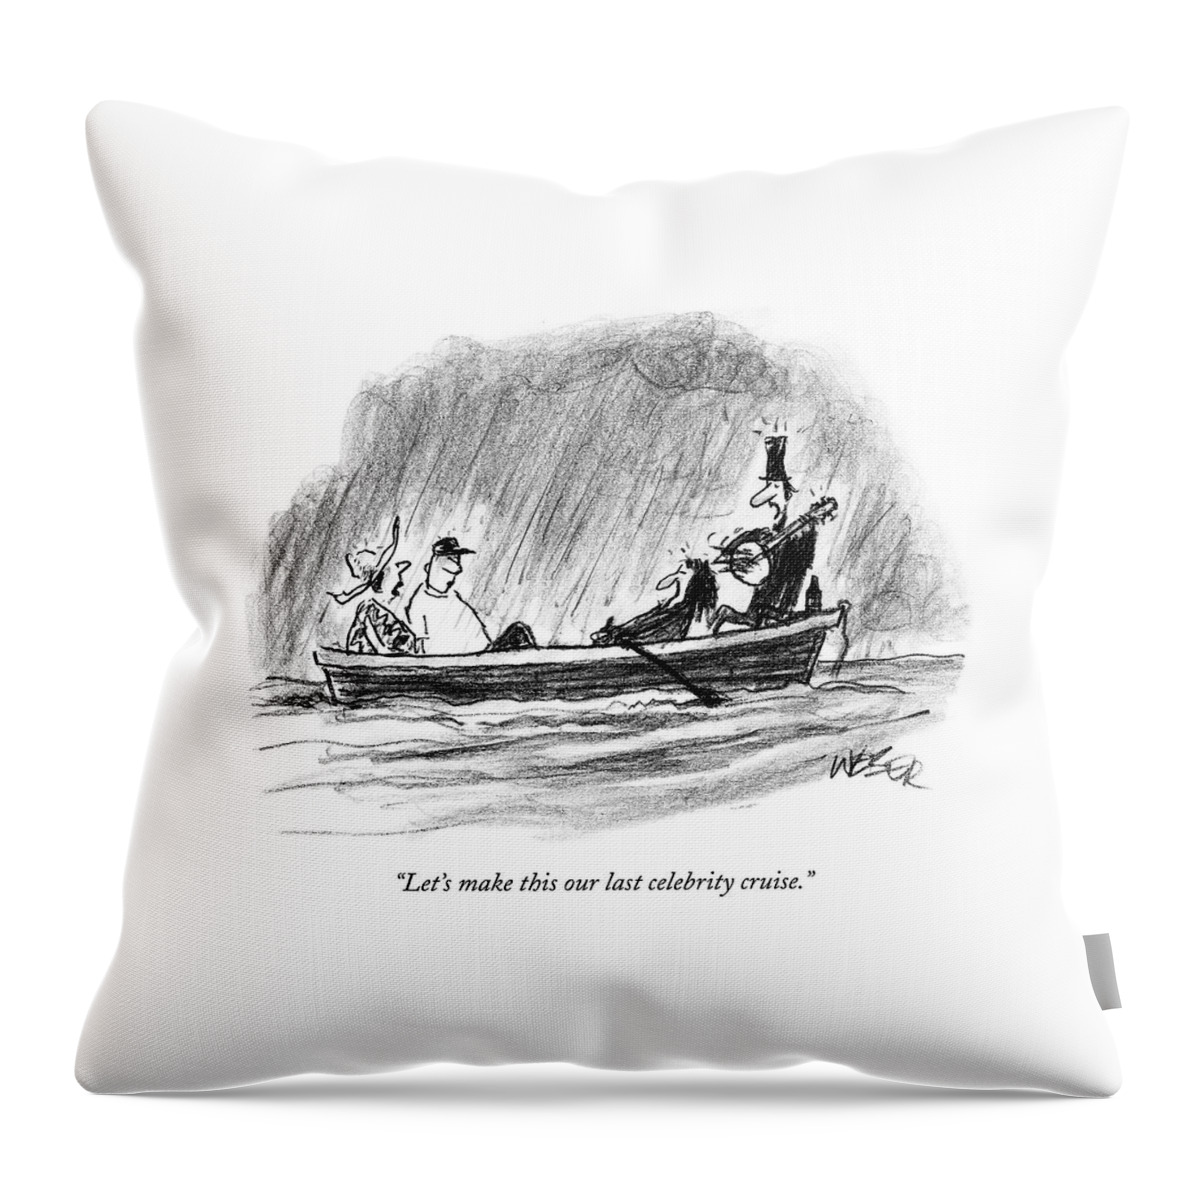 Let's Make This Our Last Celebrity Cruise Throw Pillow